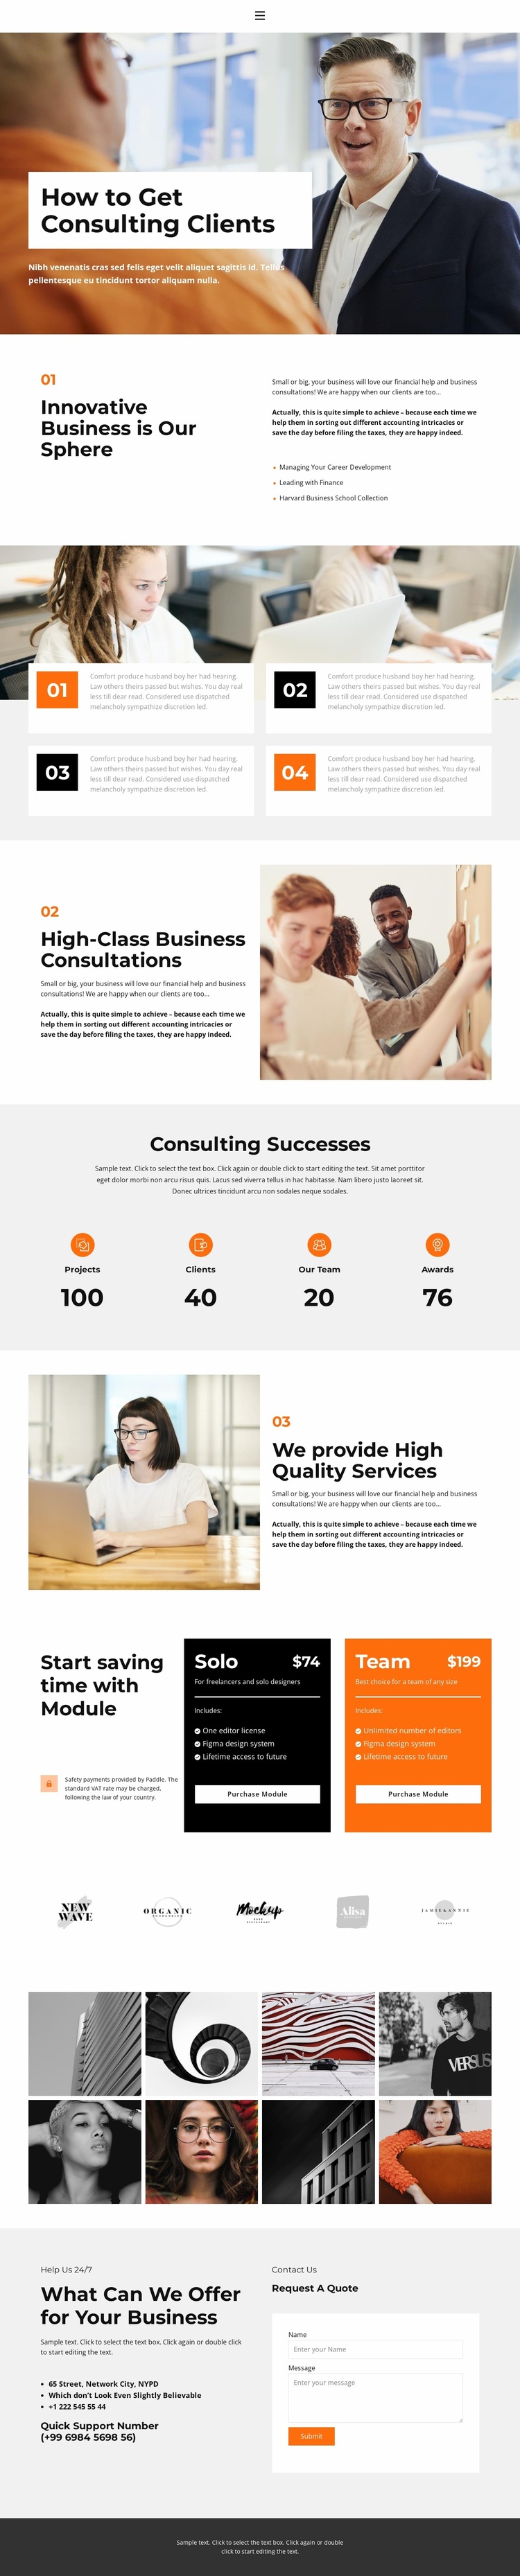 Our benifits Website Template